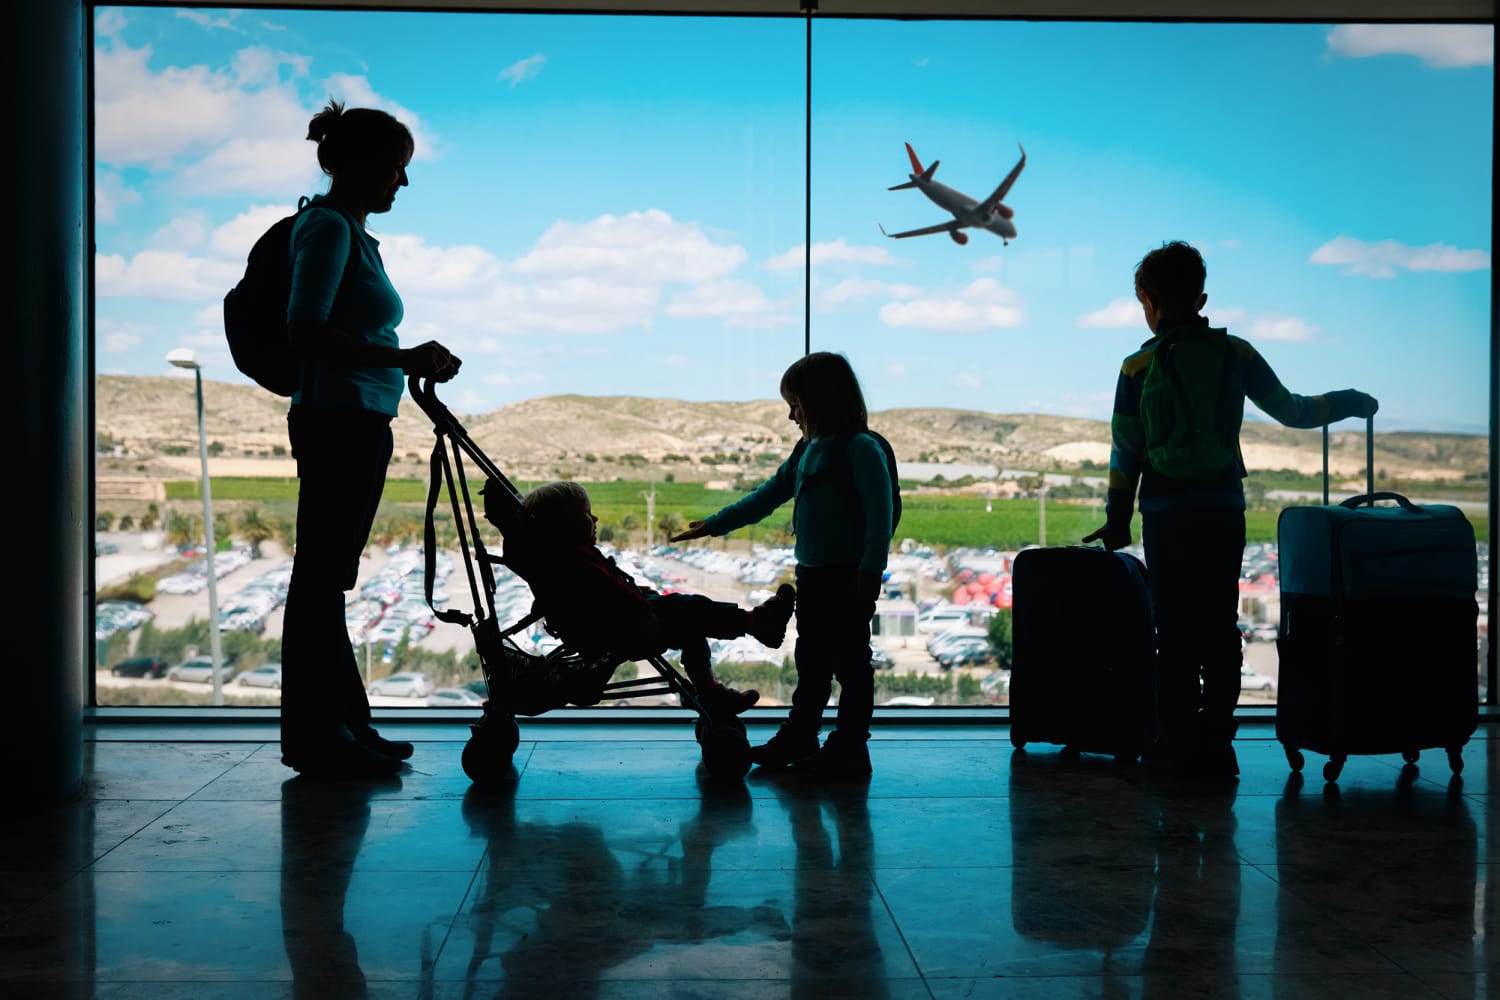 What To Take For Kids On a Plane  In-Flight Essentials For Children